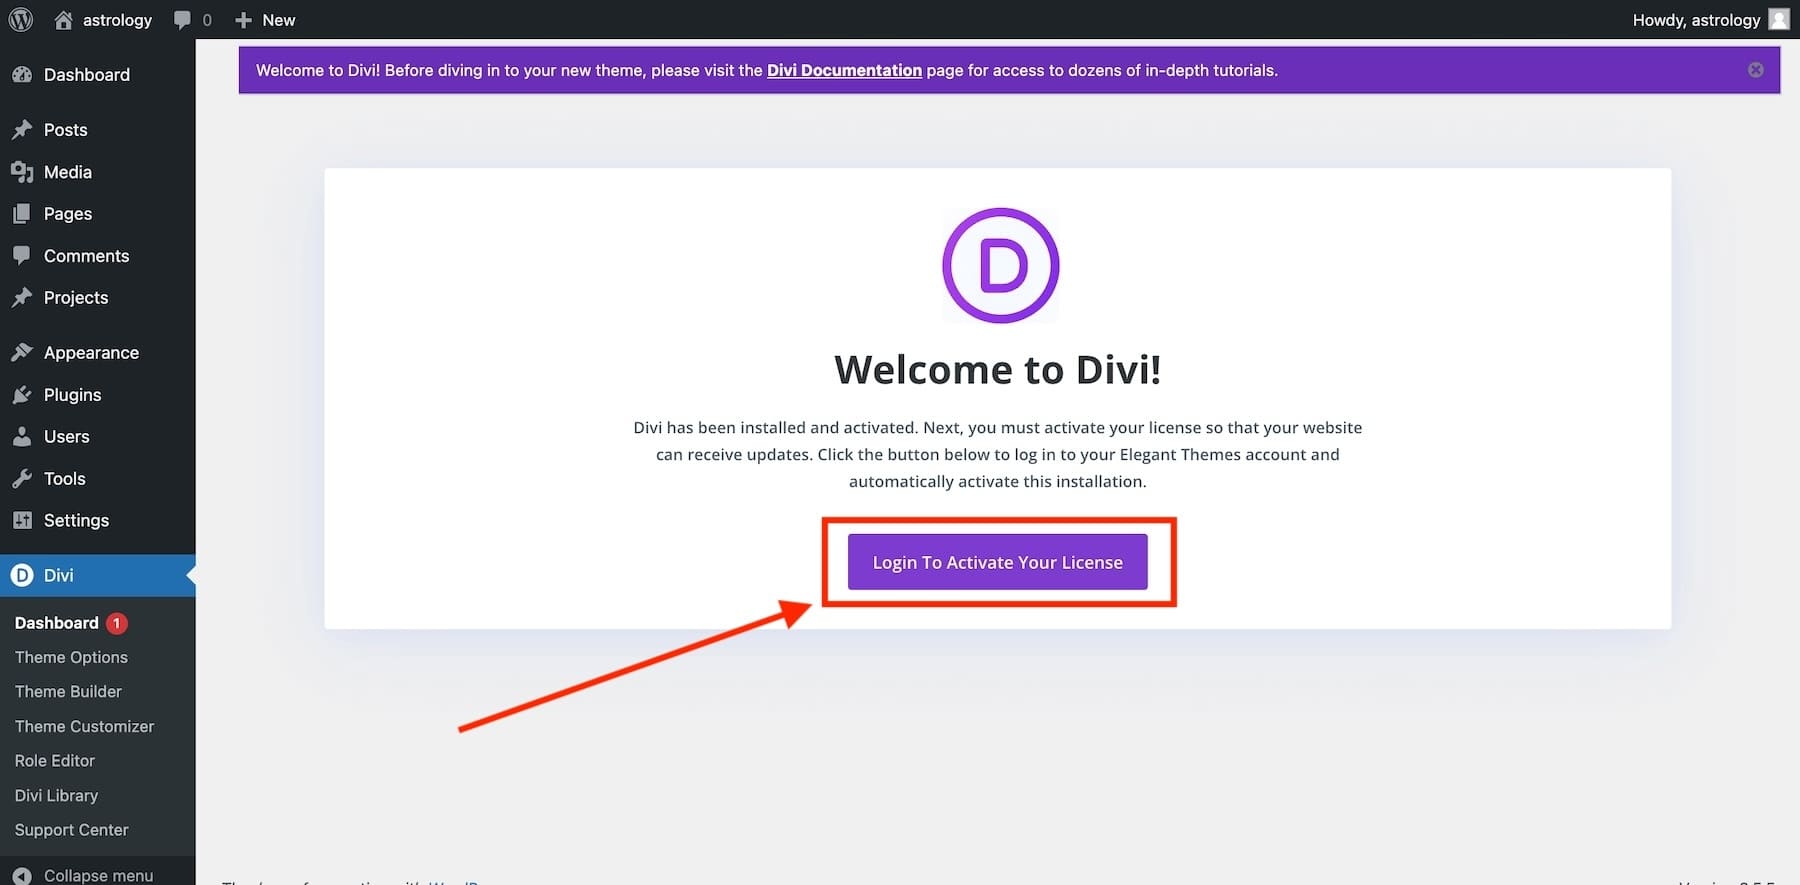 login to activate your divi license